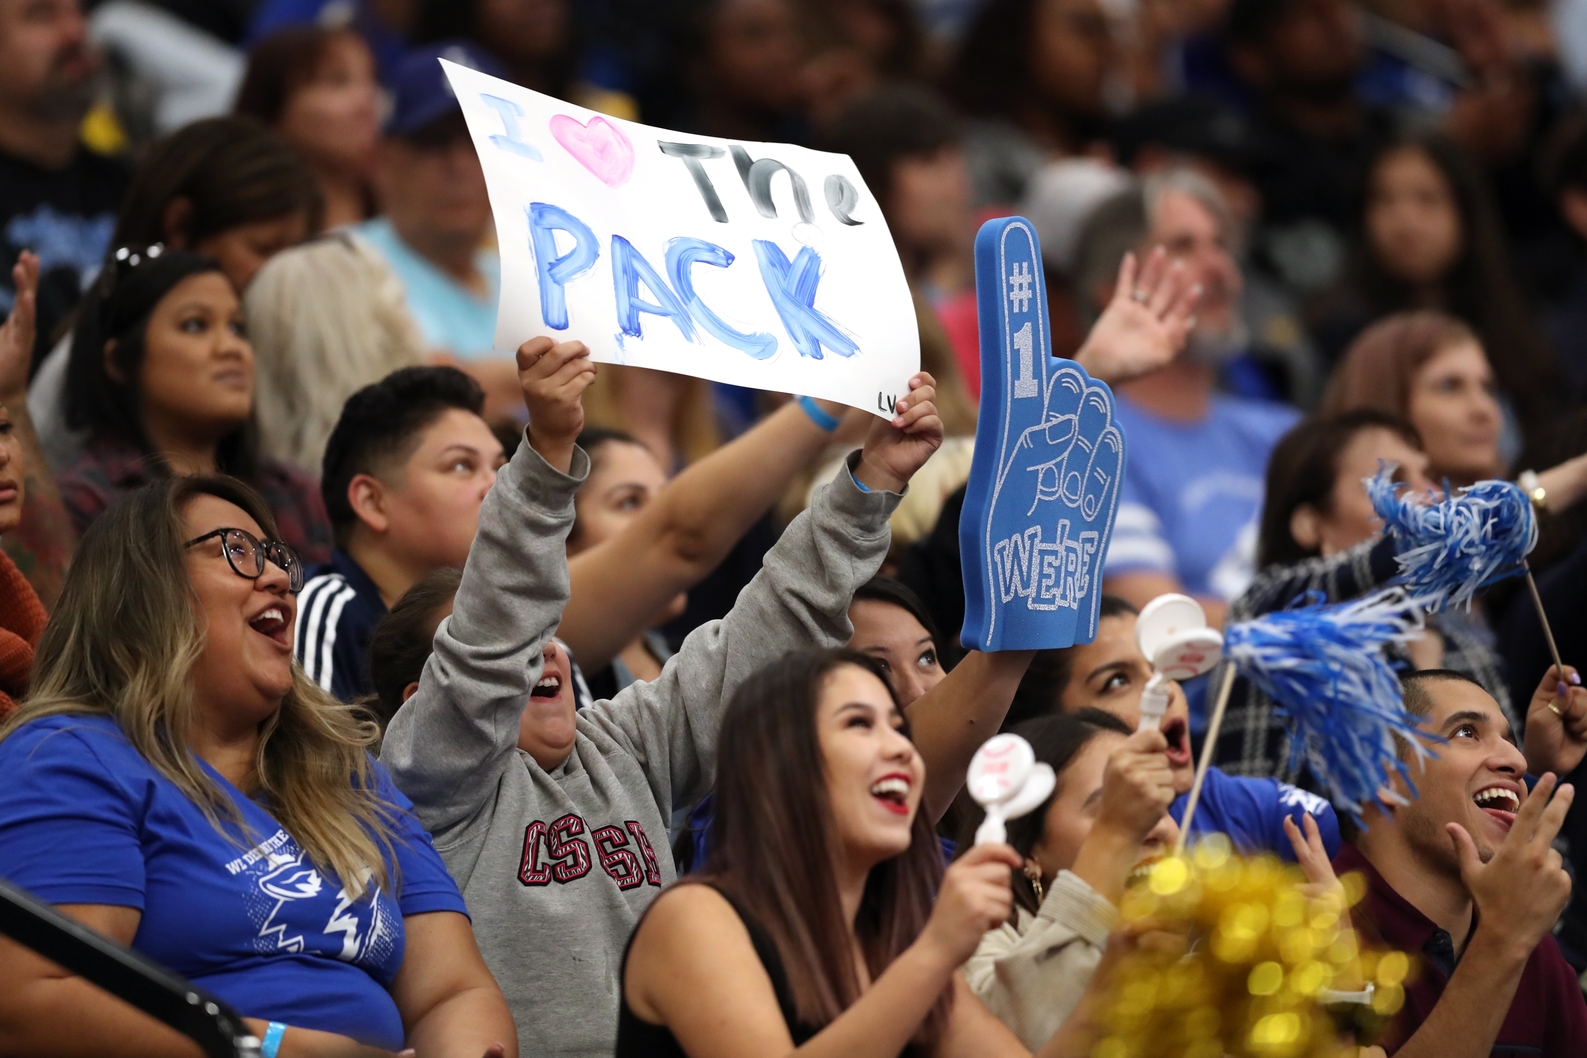 Student holding a "I love the Pack" sign.